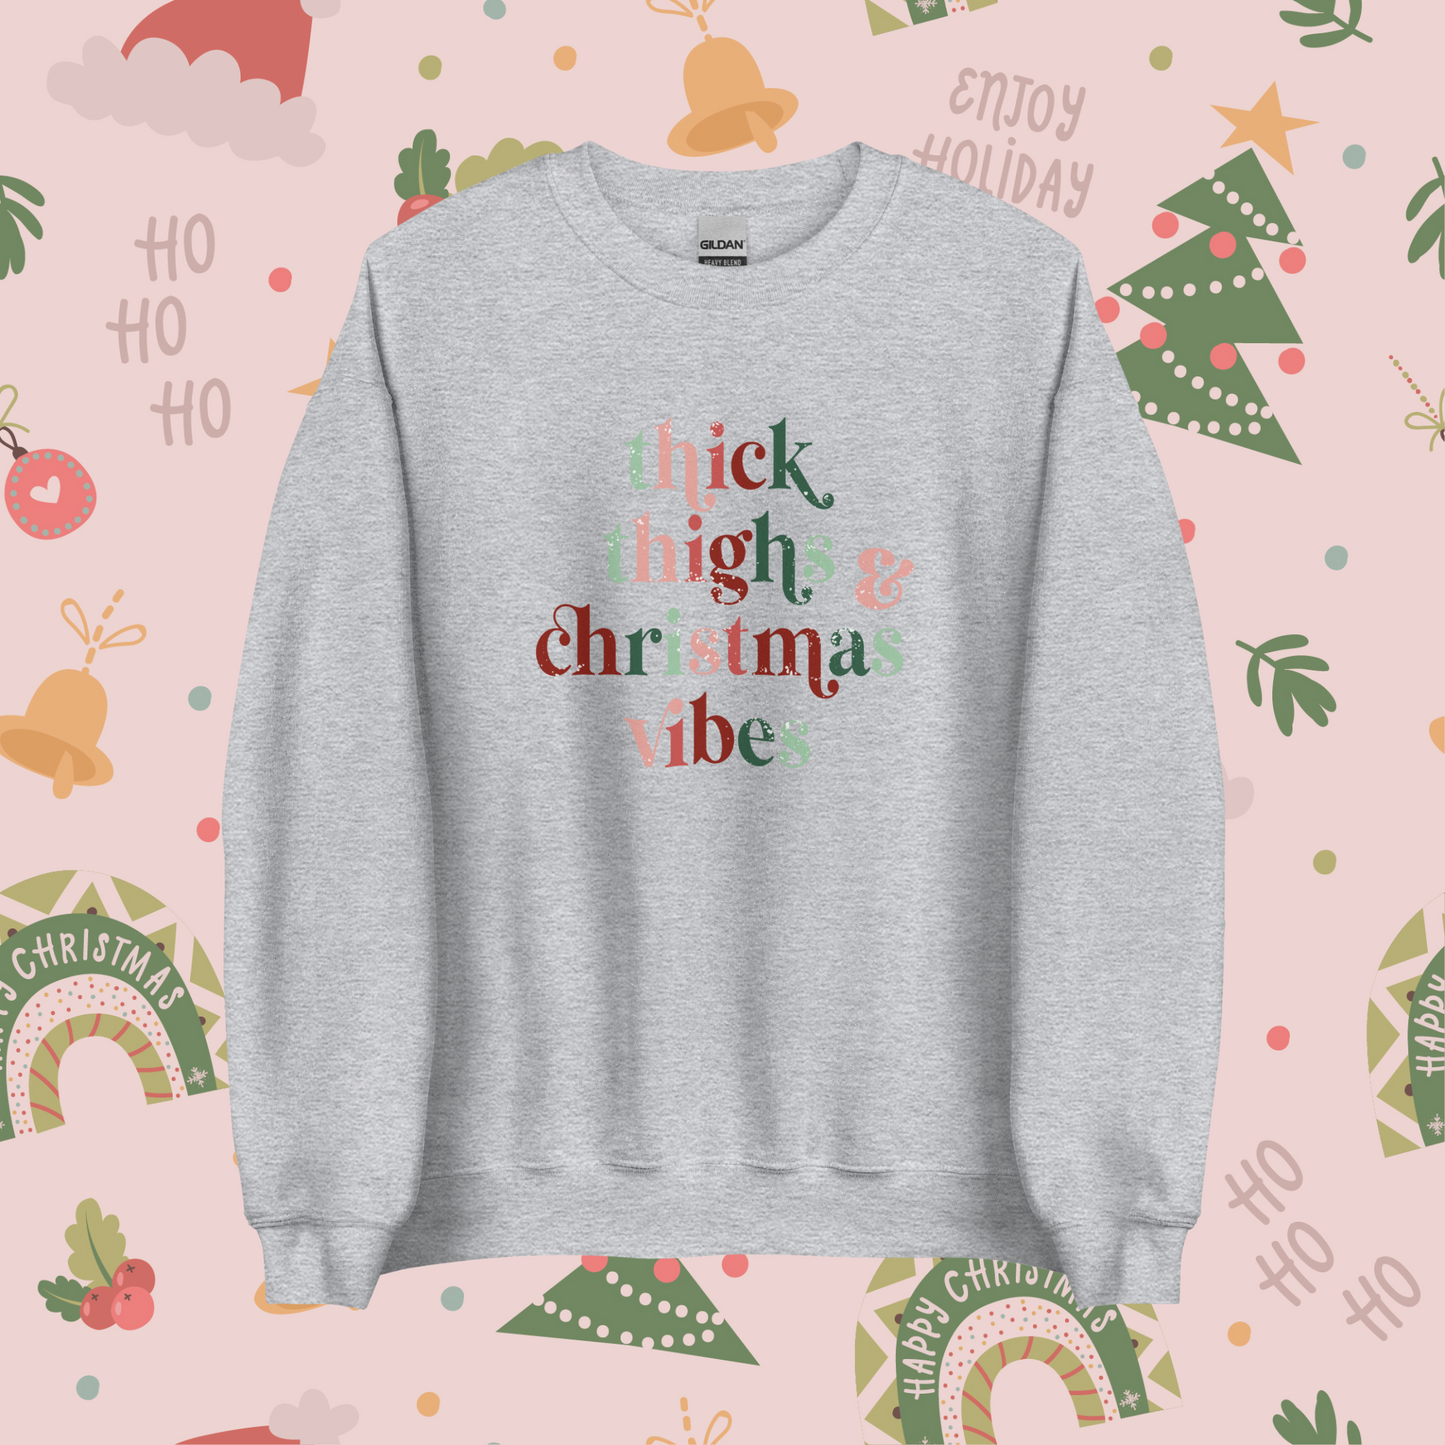 Thick Thighs and Christmas Vibes Unisex Sweatshirt